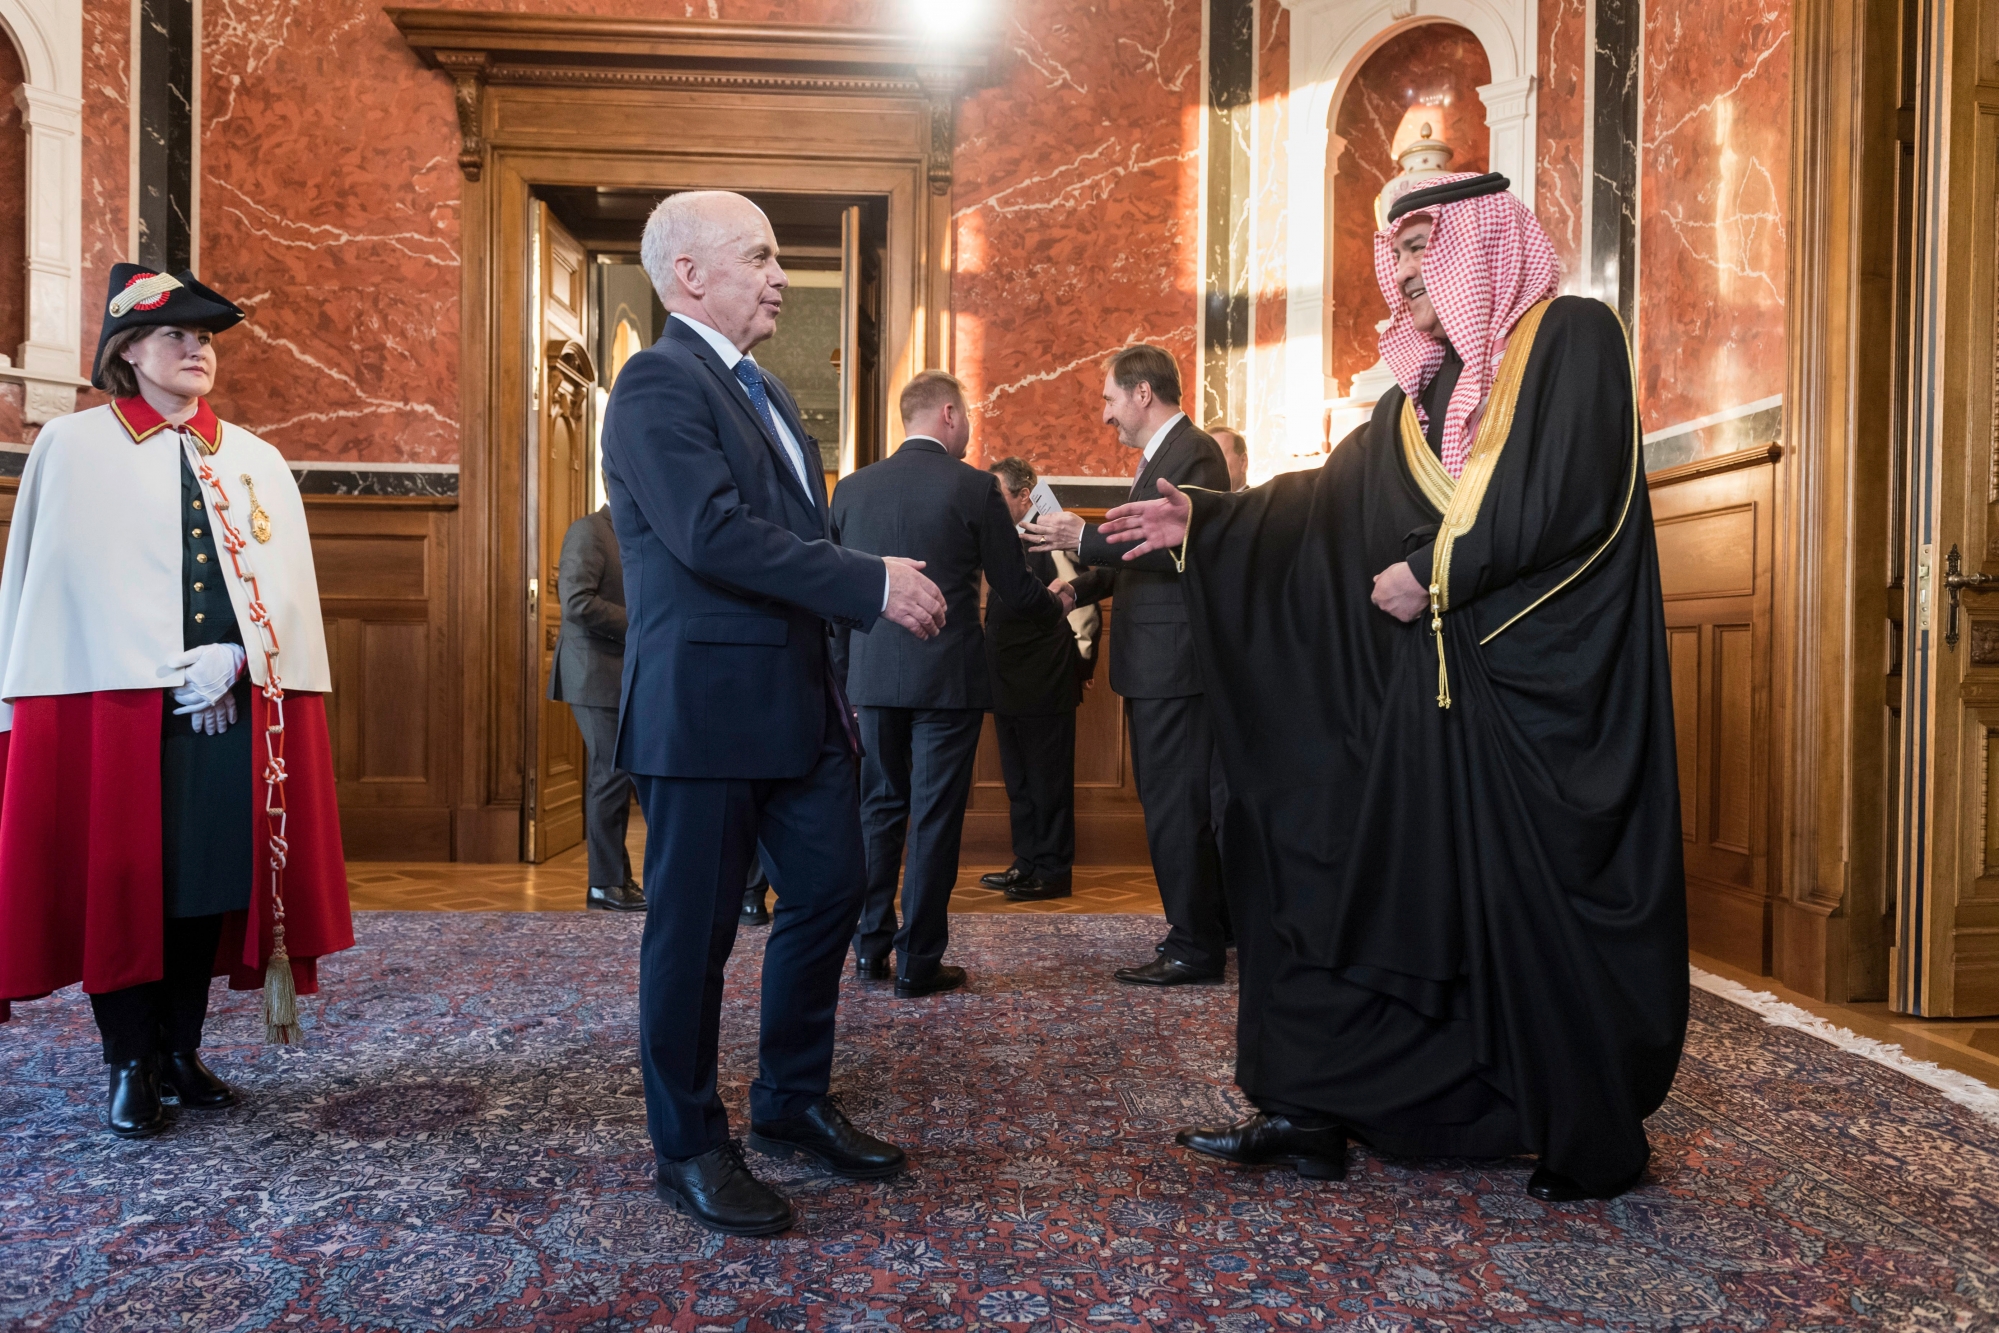 Swiss president Ueli Maurer, center, greets greets Hisham Alqahtani, ambassador of Saudi Arabia, right, during the traditional New YearÕs reception of the diplomatic corps, Wednesday, January 16, 2019 in the Federal palace in Bern. The ceremony is attended by the ambassadors, charges d'affaires, presidents of the National Council and Council of States, chairs of both councilsÕ foreign affairs committees and the authorities of the city and canton of Bern. Far left, Maurer's usher Maria Wisler. (KEYSTONE/Alessandro della Valle) SWITZERLAND NEW YEAR'S GREETINGS DIPLOMATIC CORPS